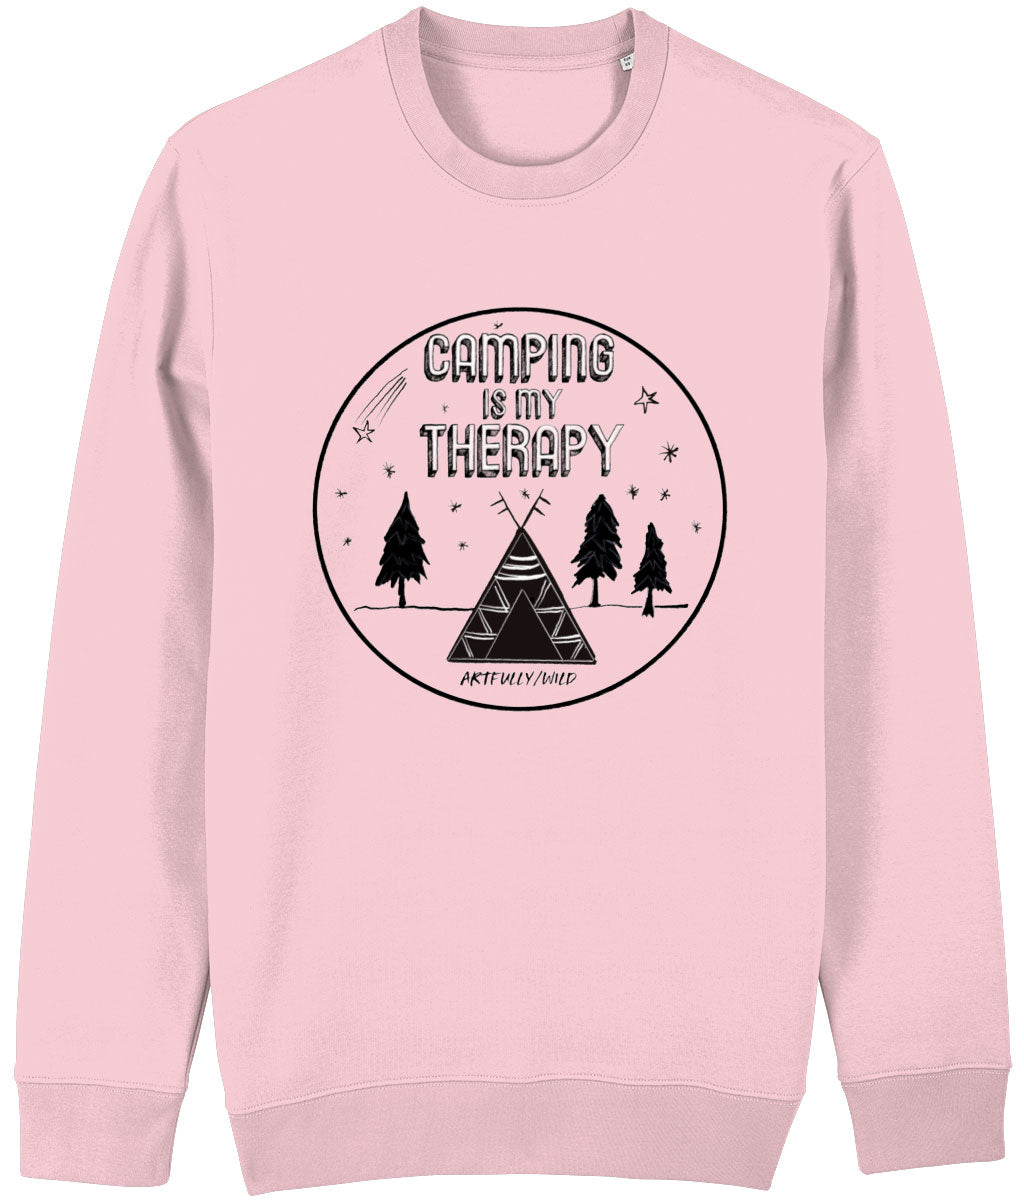 'CAMPING IS MY THERAPY' Organic Cotton Pink Unisex Crew Neck Sweatshirt. Printed with eco-friendly water-based Inks. Original Design by Artfully Wild.